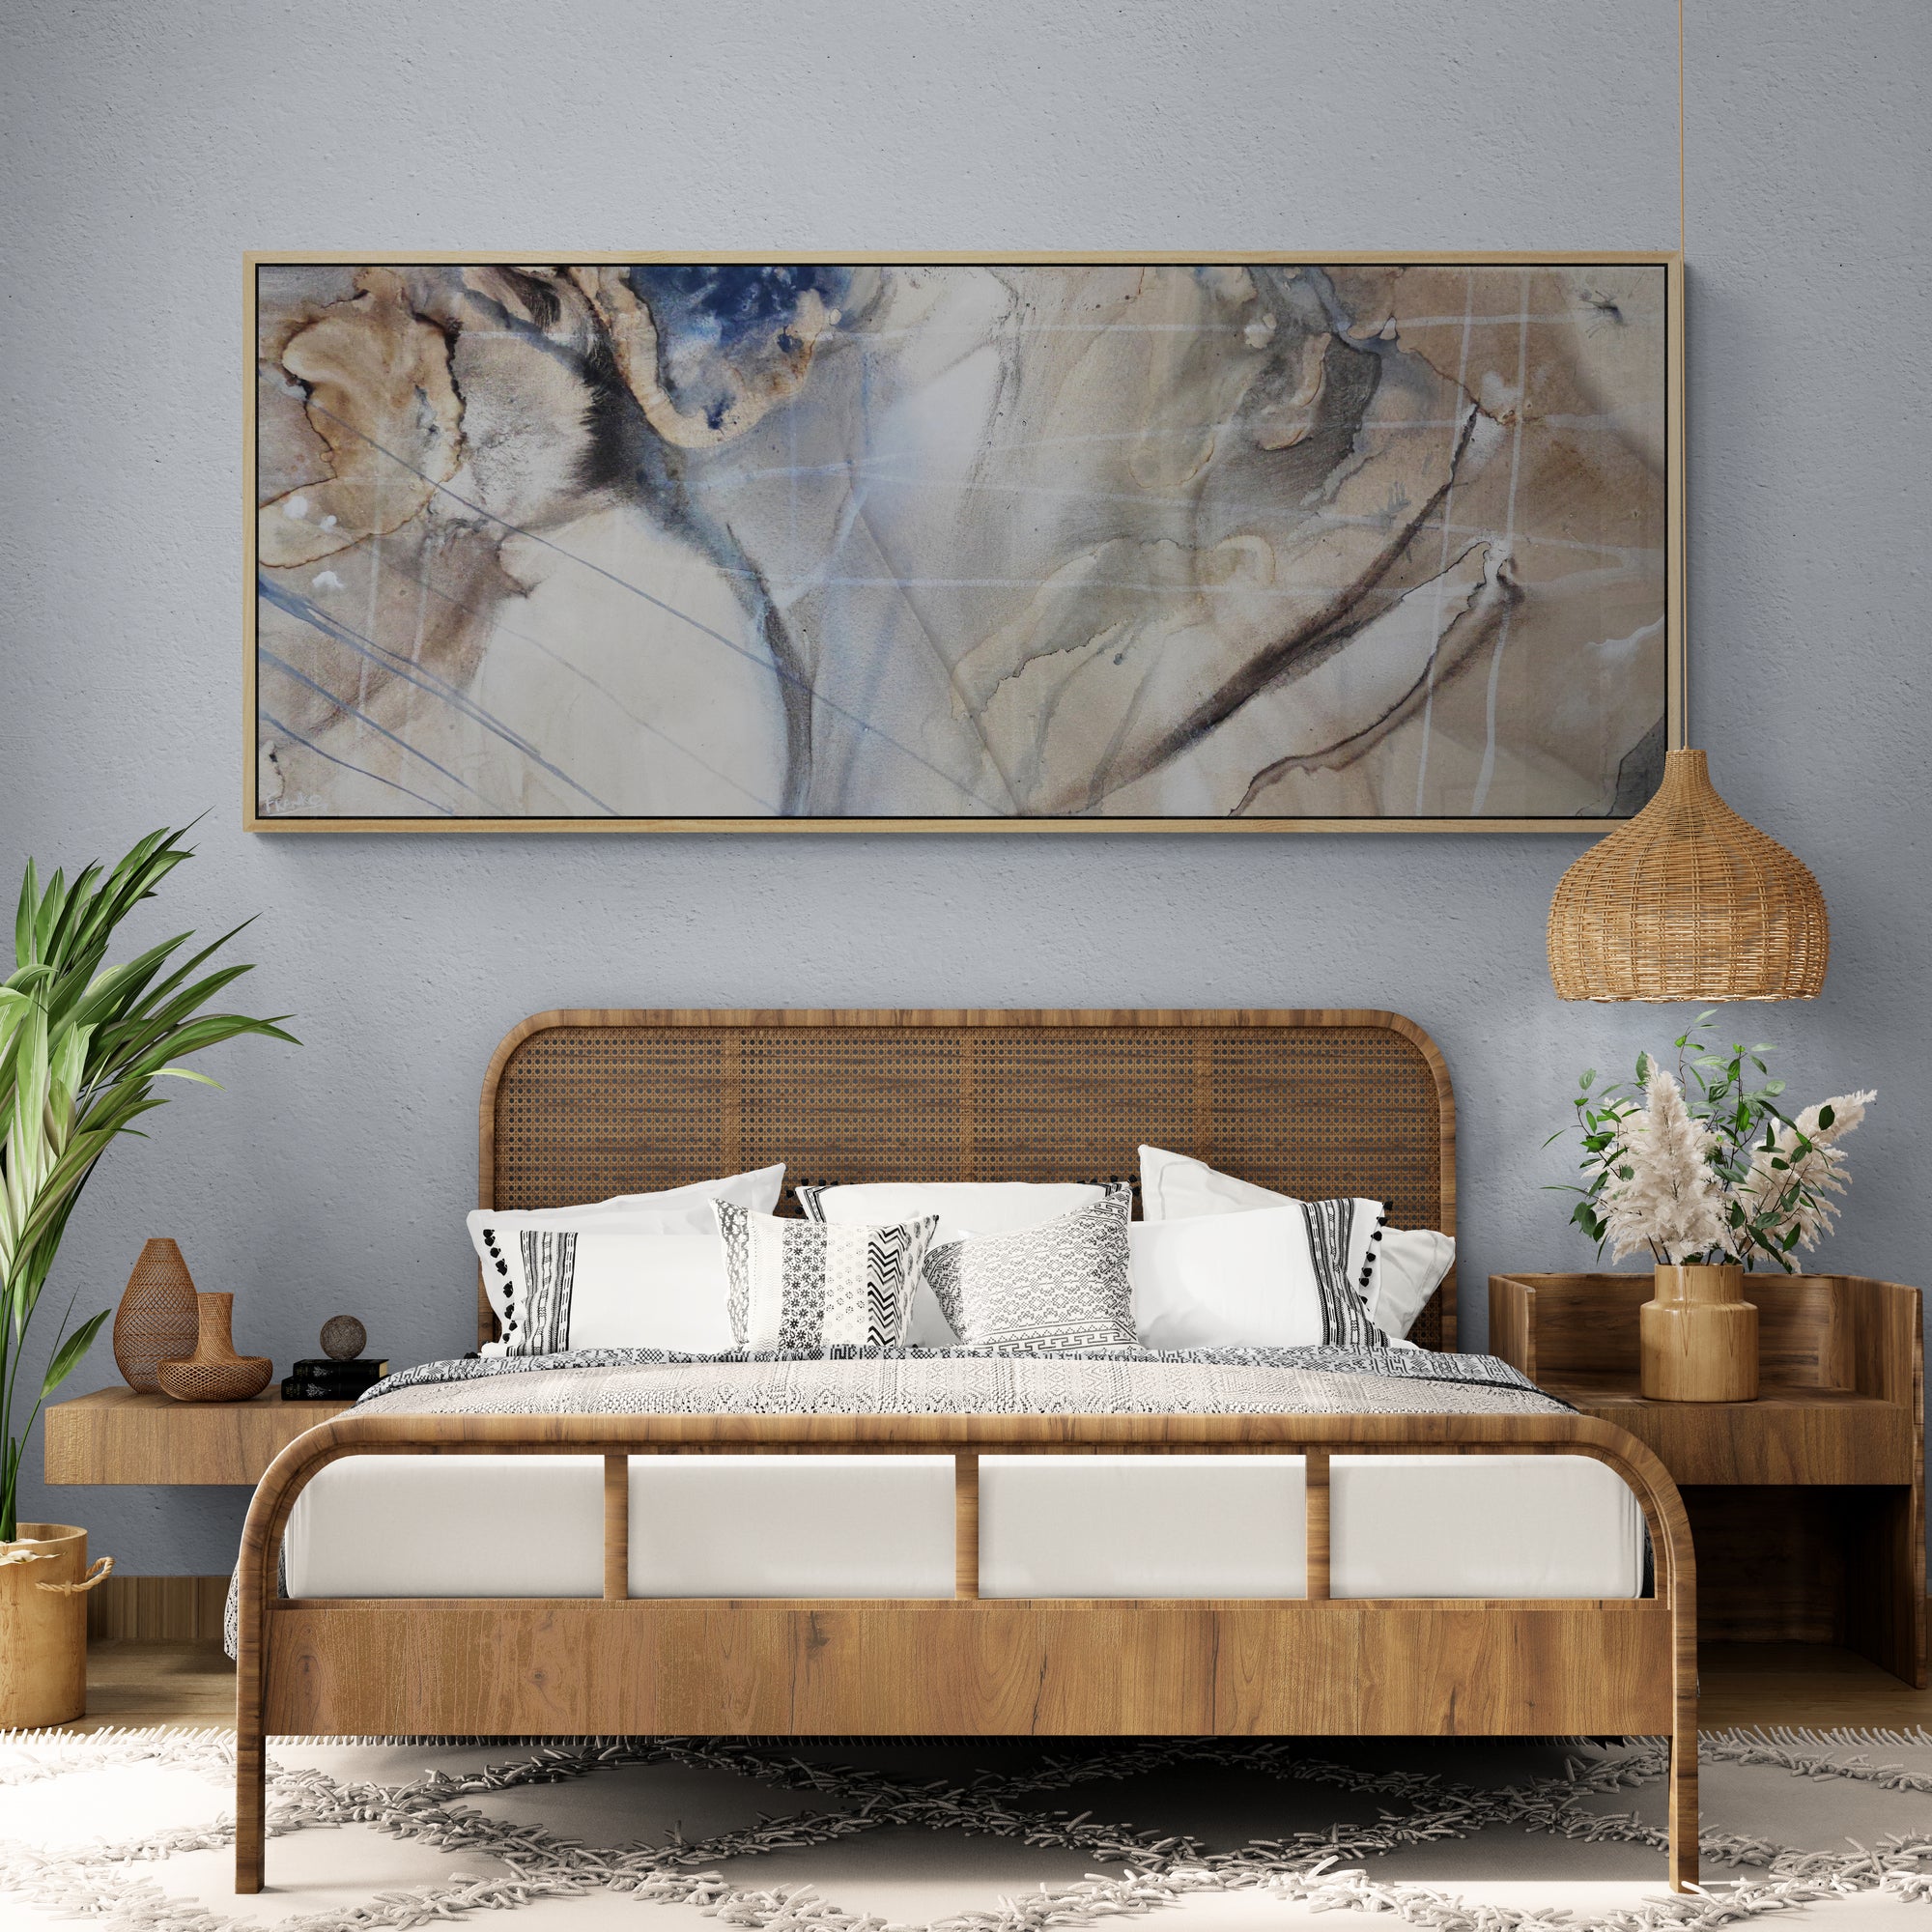 Refined 69 200cm x 80cm Cream Blue Rust White Grey Blended Abstract Painting Oak Frame